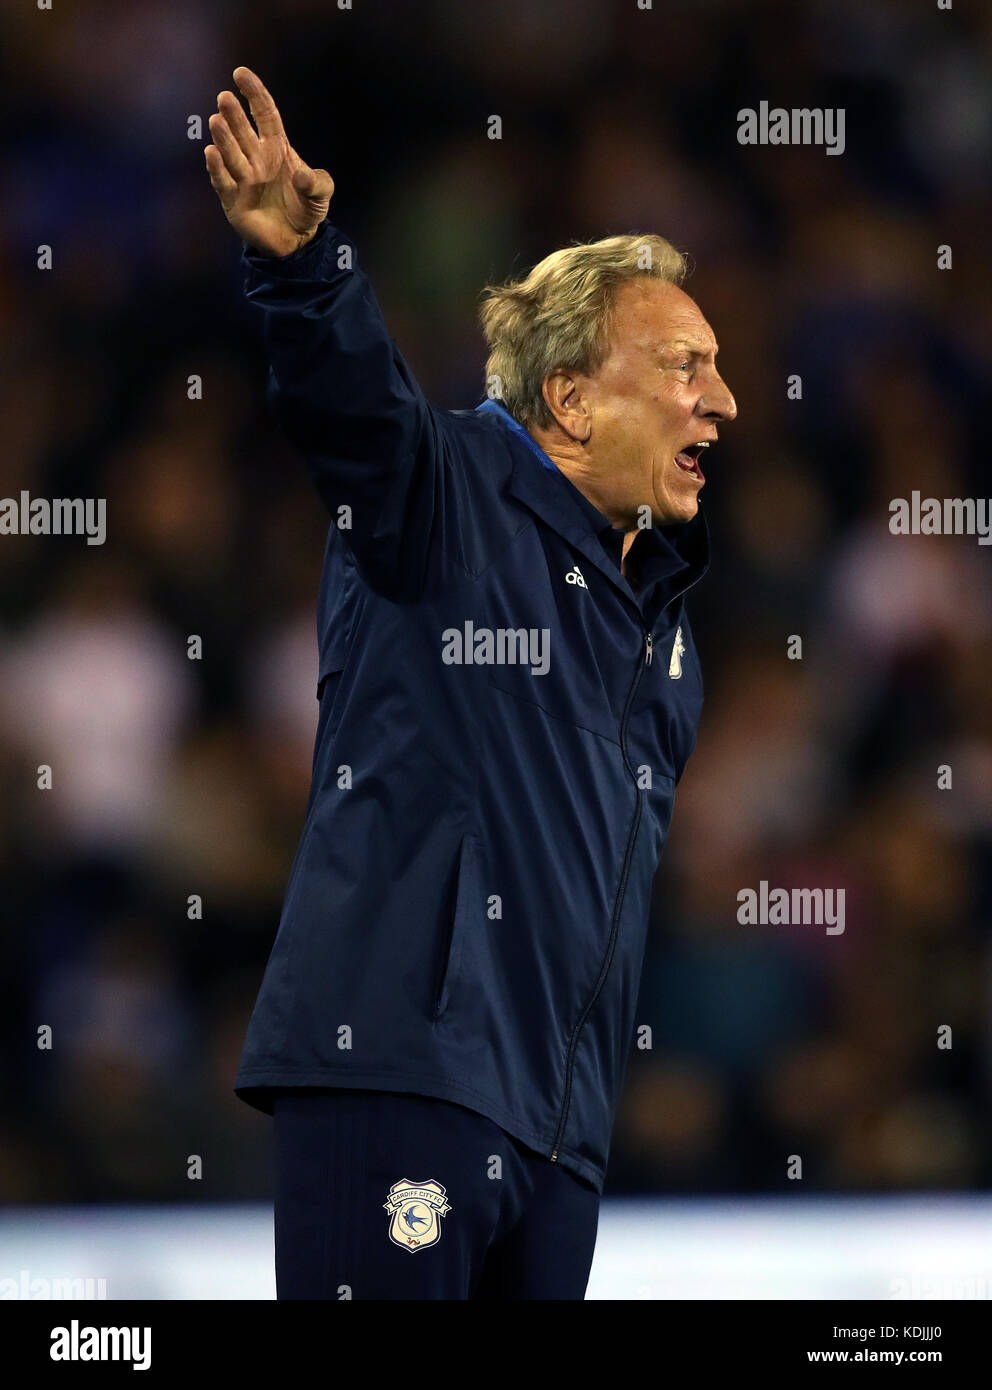 Cardiff City manager Neil Warnock during the Sky Bet Championship match St Andrew's, Birmingham. PRESS ASSOCIATION Photo. Picture date: Friday October 13, 2017. See PA story SOCCER Birmingham. Photo credit should read: Nick Potts/PA Wire. No use with unauthorised audio, video, data, fixture lists, club/league logos or 'live' services. Online in-match use limited to 75 images, no video emulation. No use in betting, games or single club/league/player publications. Stock Photo